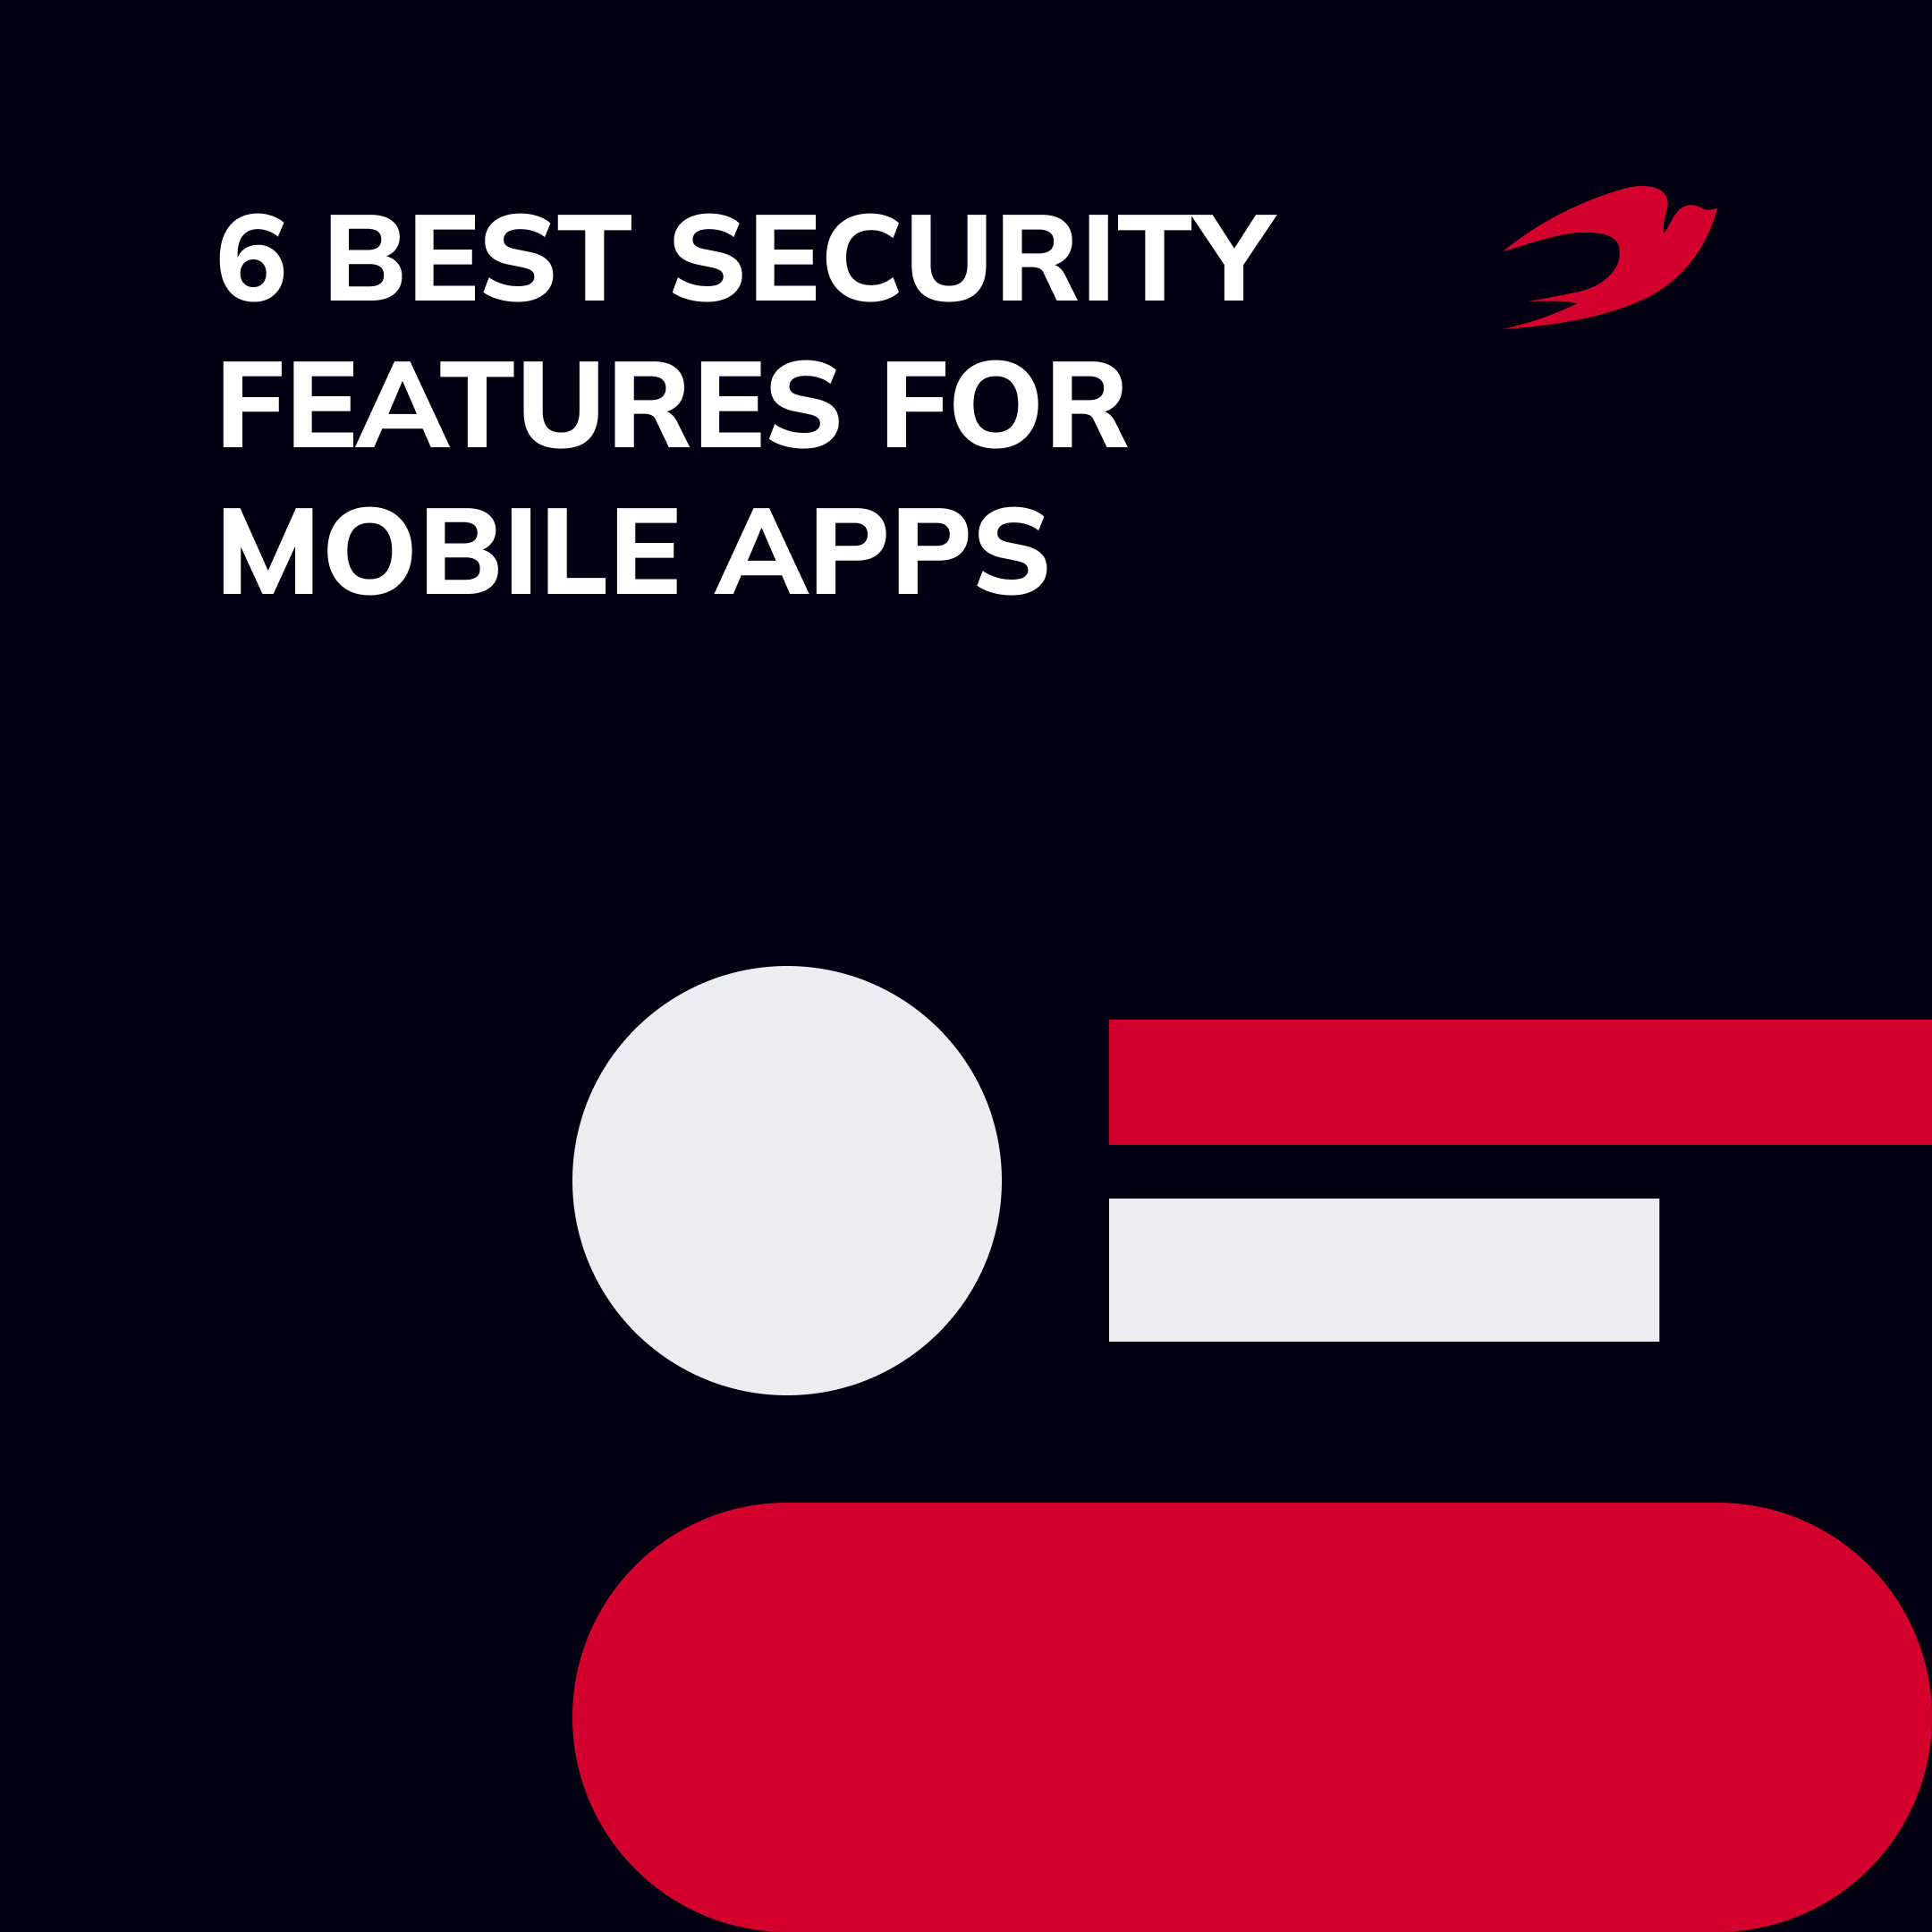 6 Best Security Features for Mobile Apps